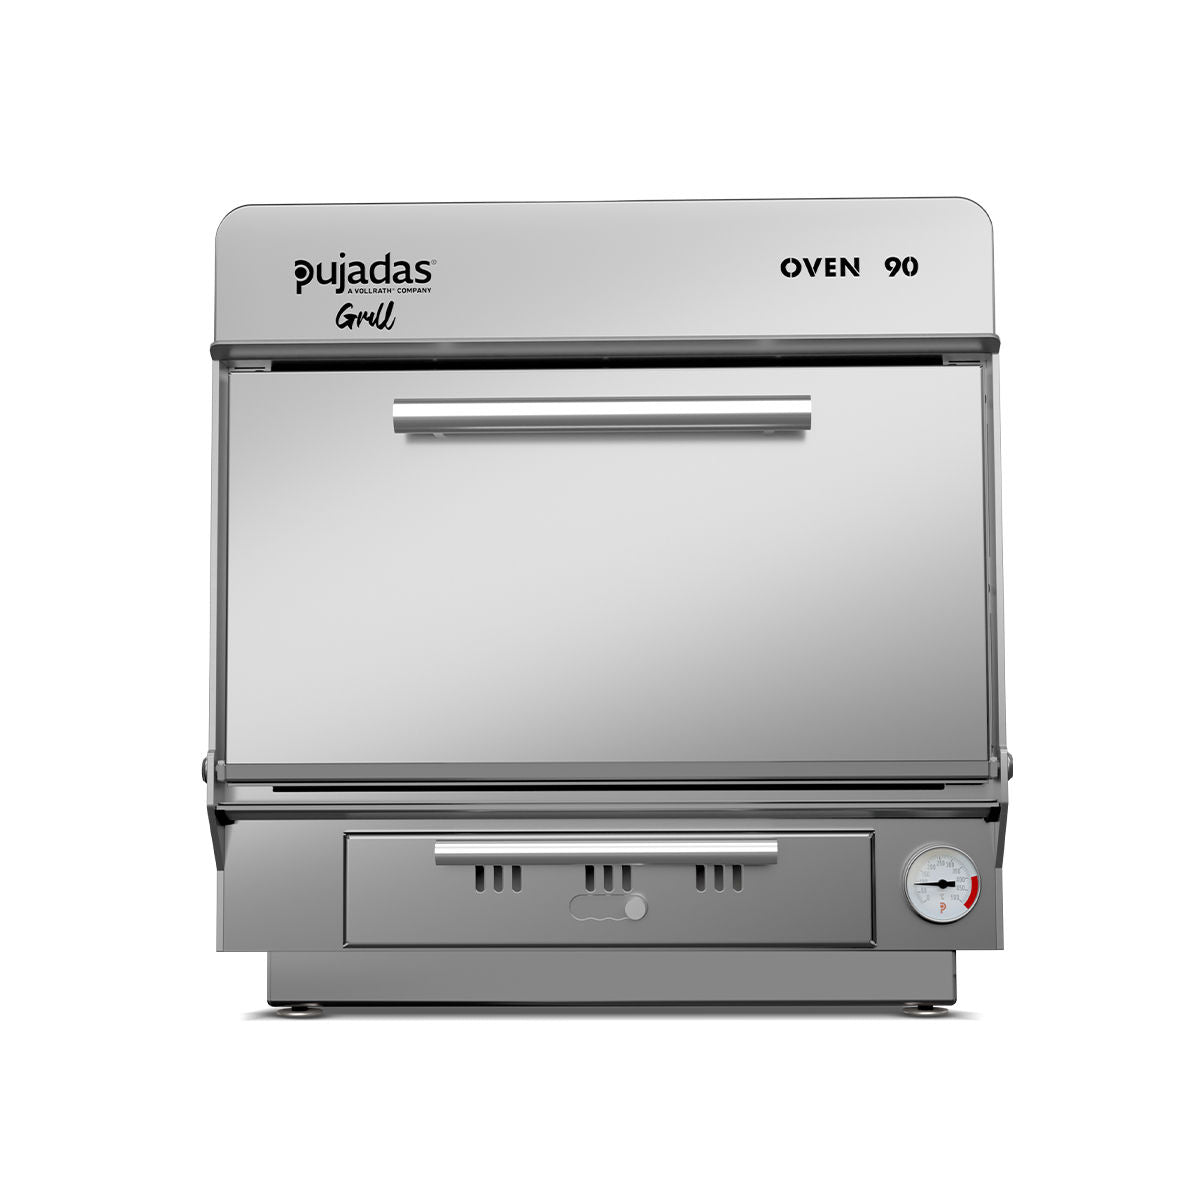 Pujadas Charcoal Countertop Oven 85090 front view